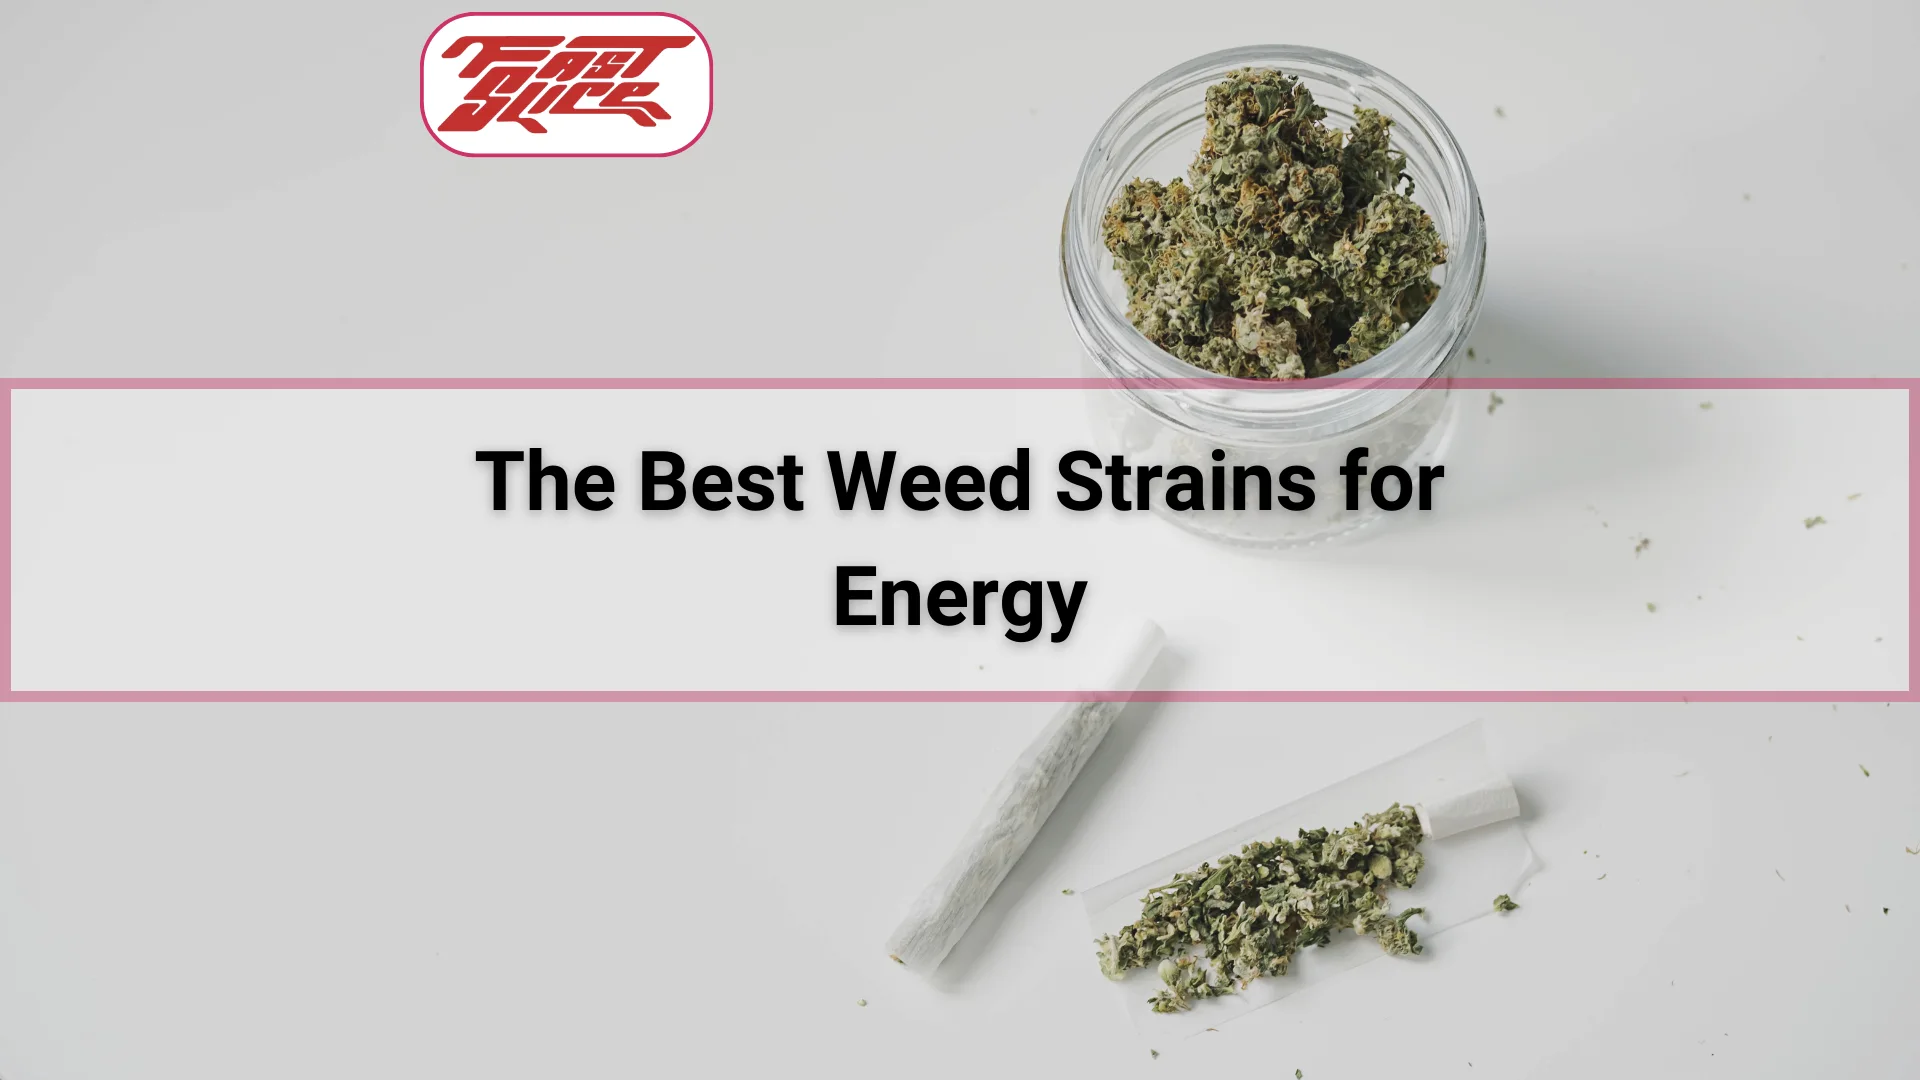 The Best Weed Strains for Energy, buds of weed in a glass jar with 2 joints by the side